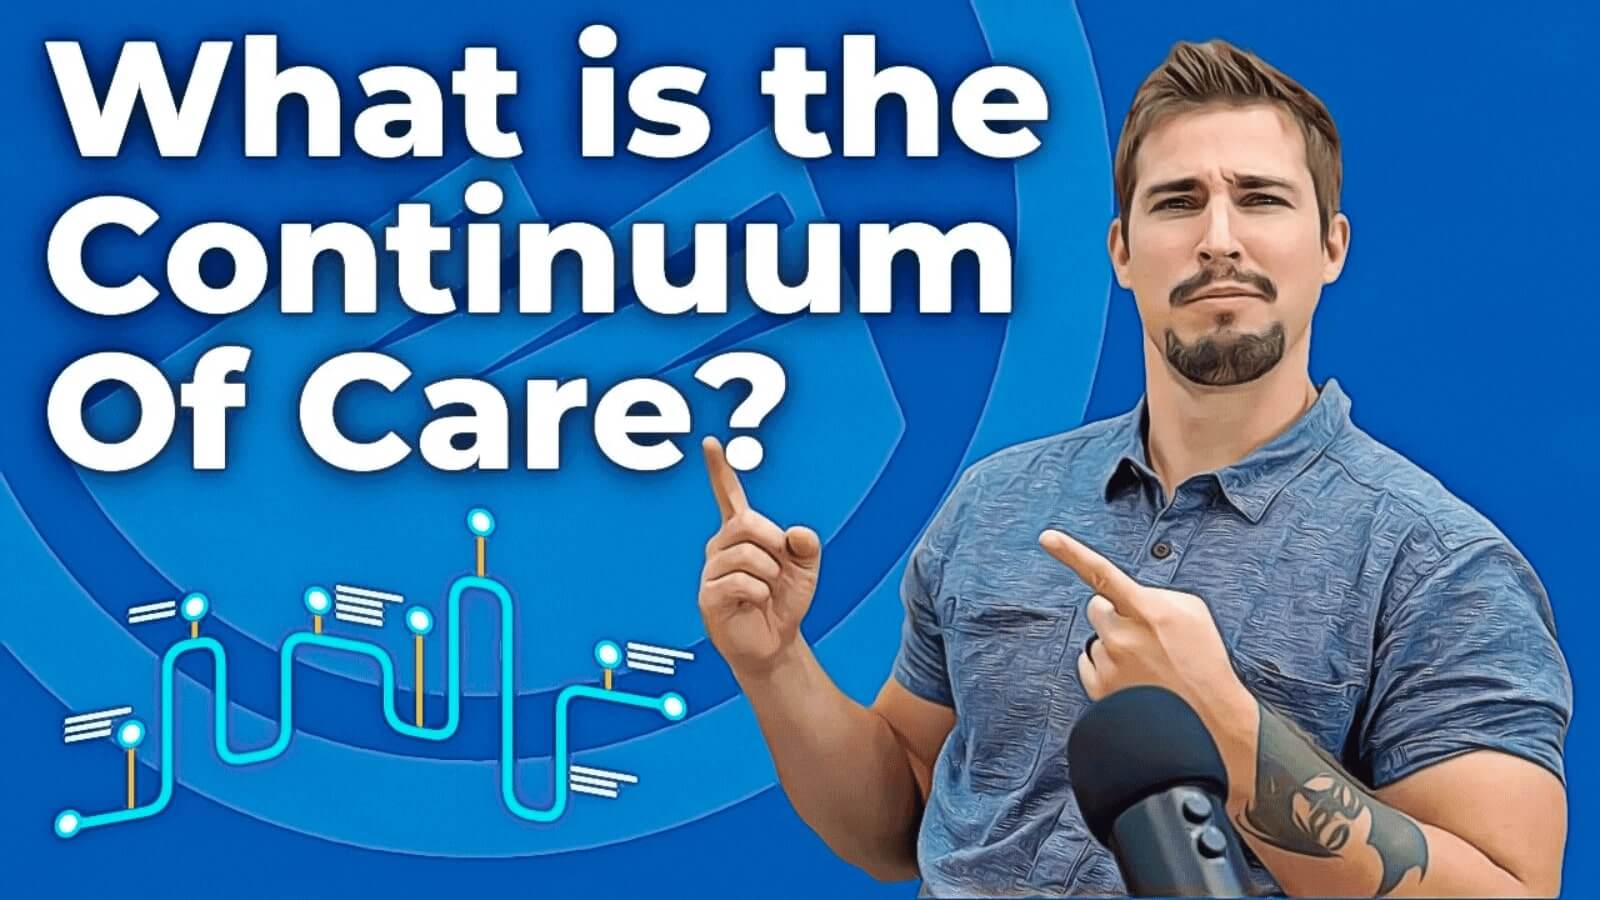 What is the continuum of care? text and an image of a man pointing at the text looking curious